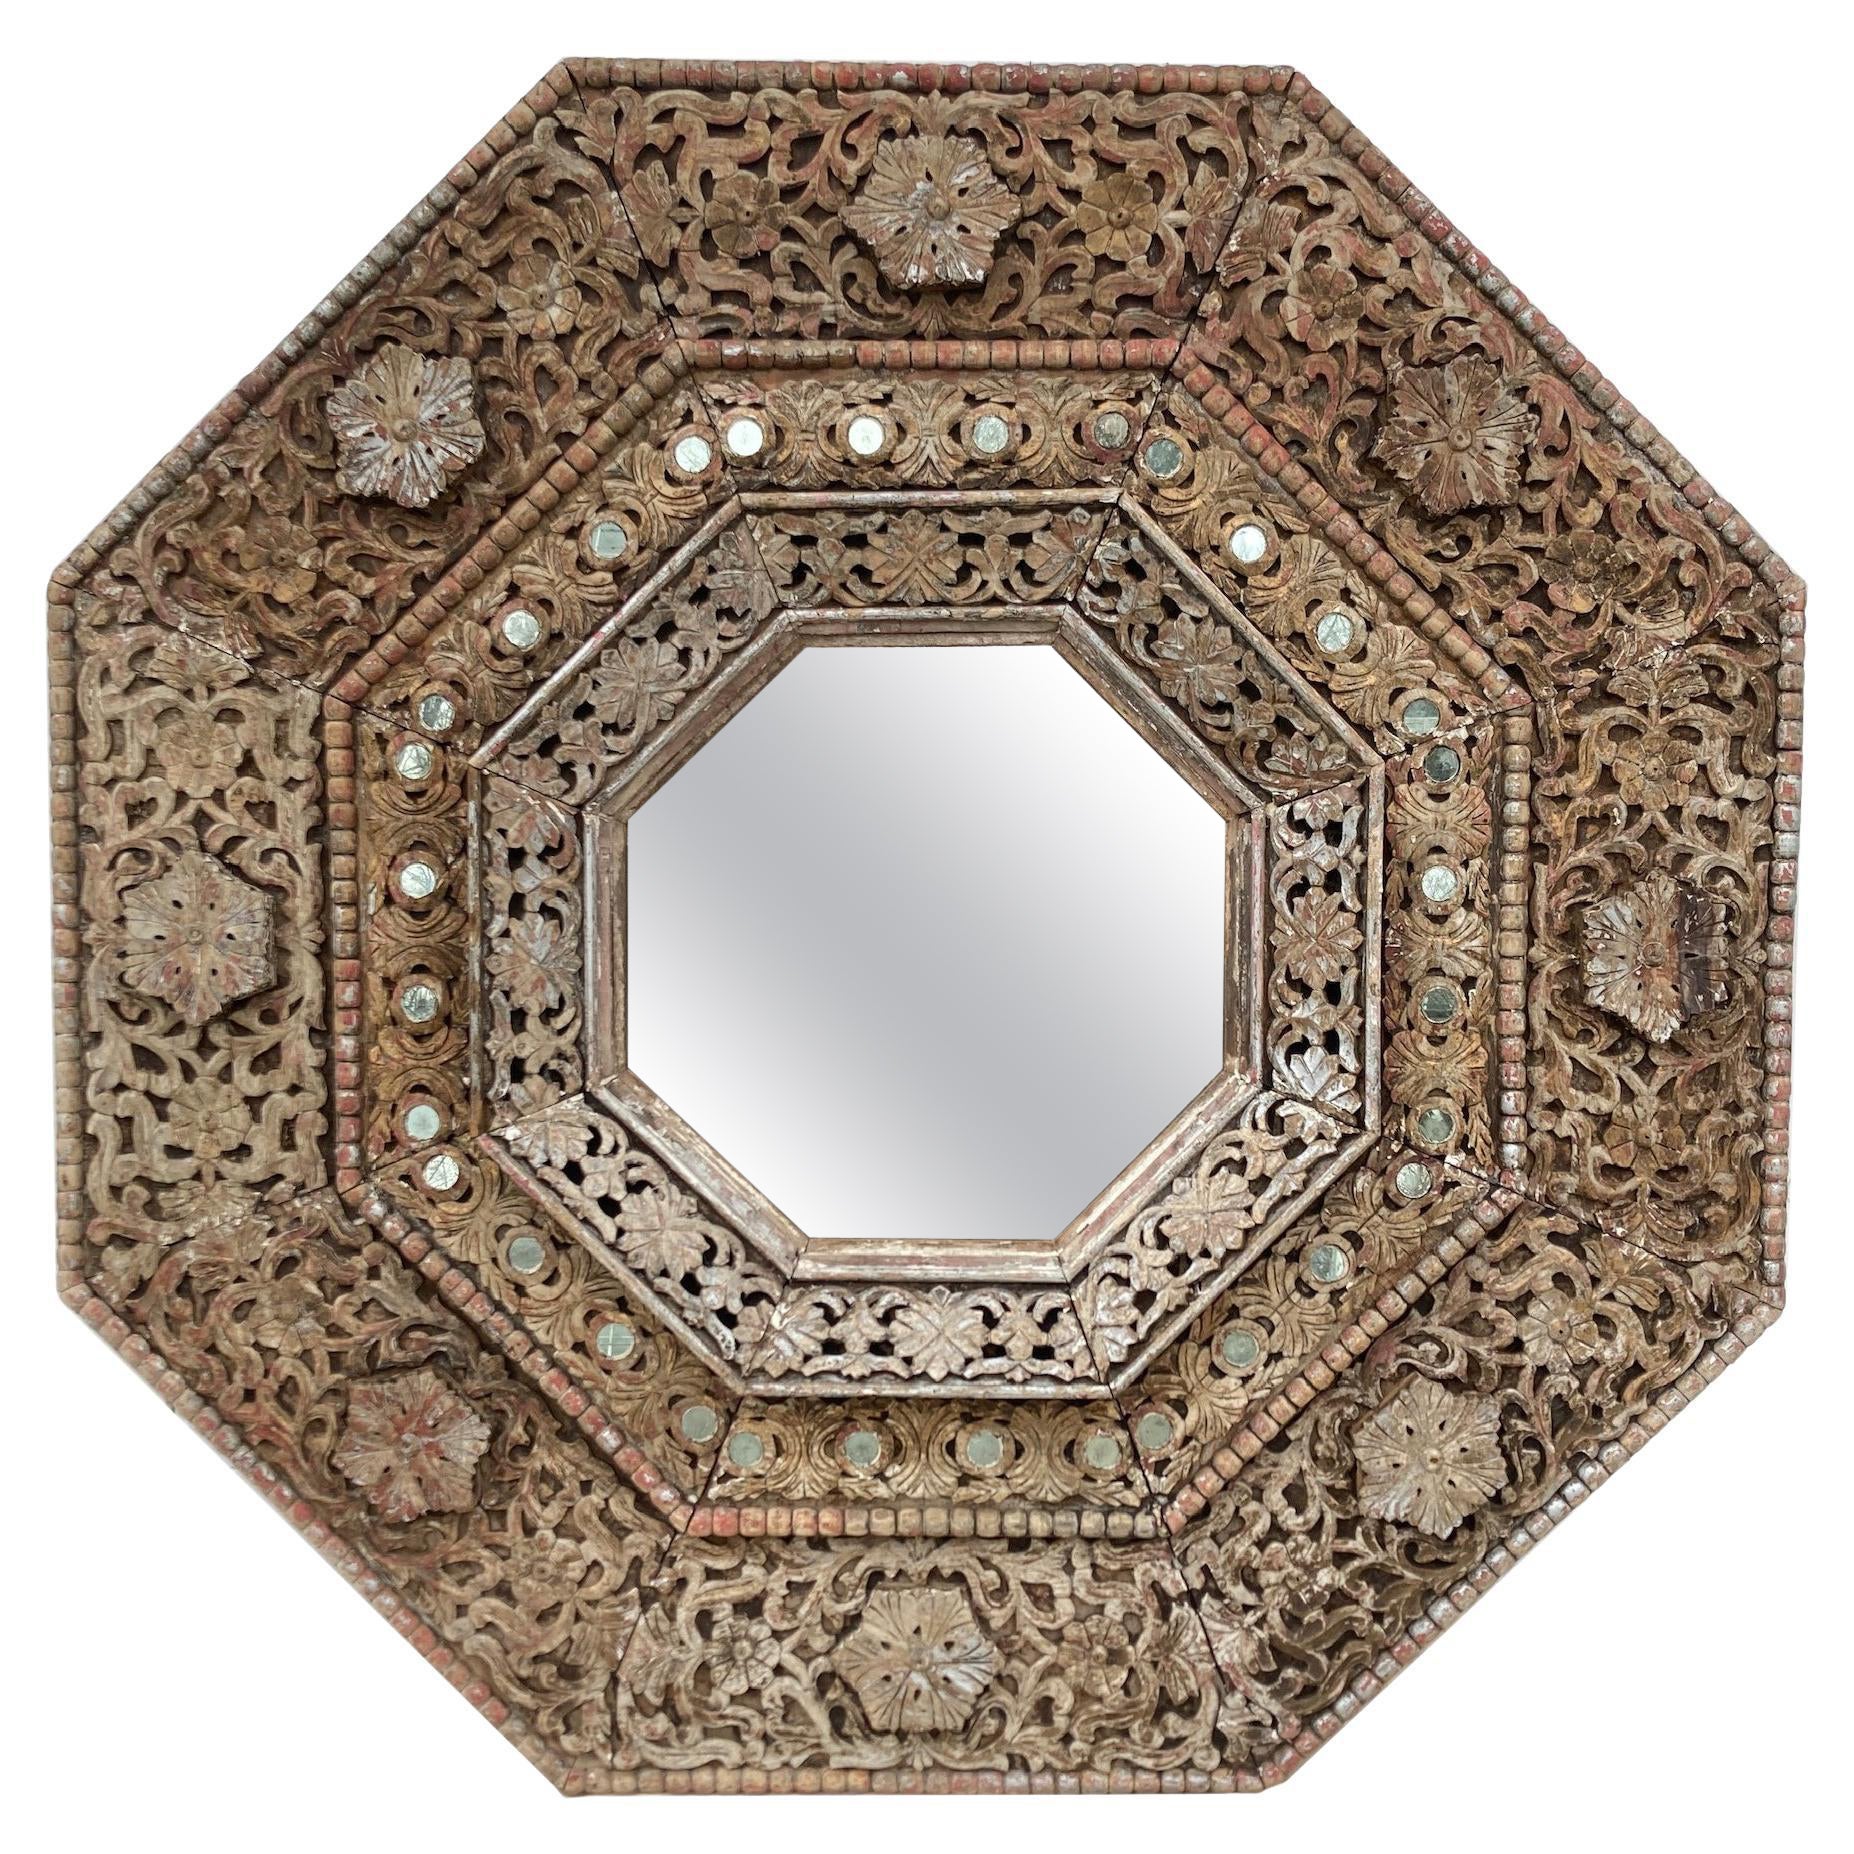 Monumental 1950's Carved Indian Octagonal Mirror For Sale